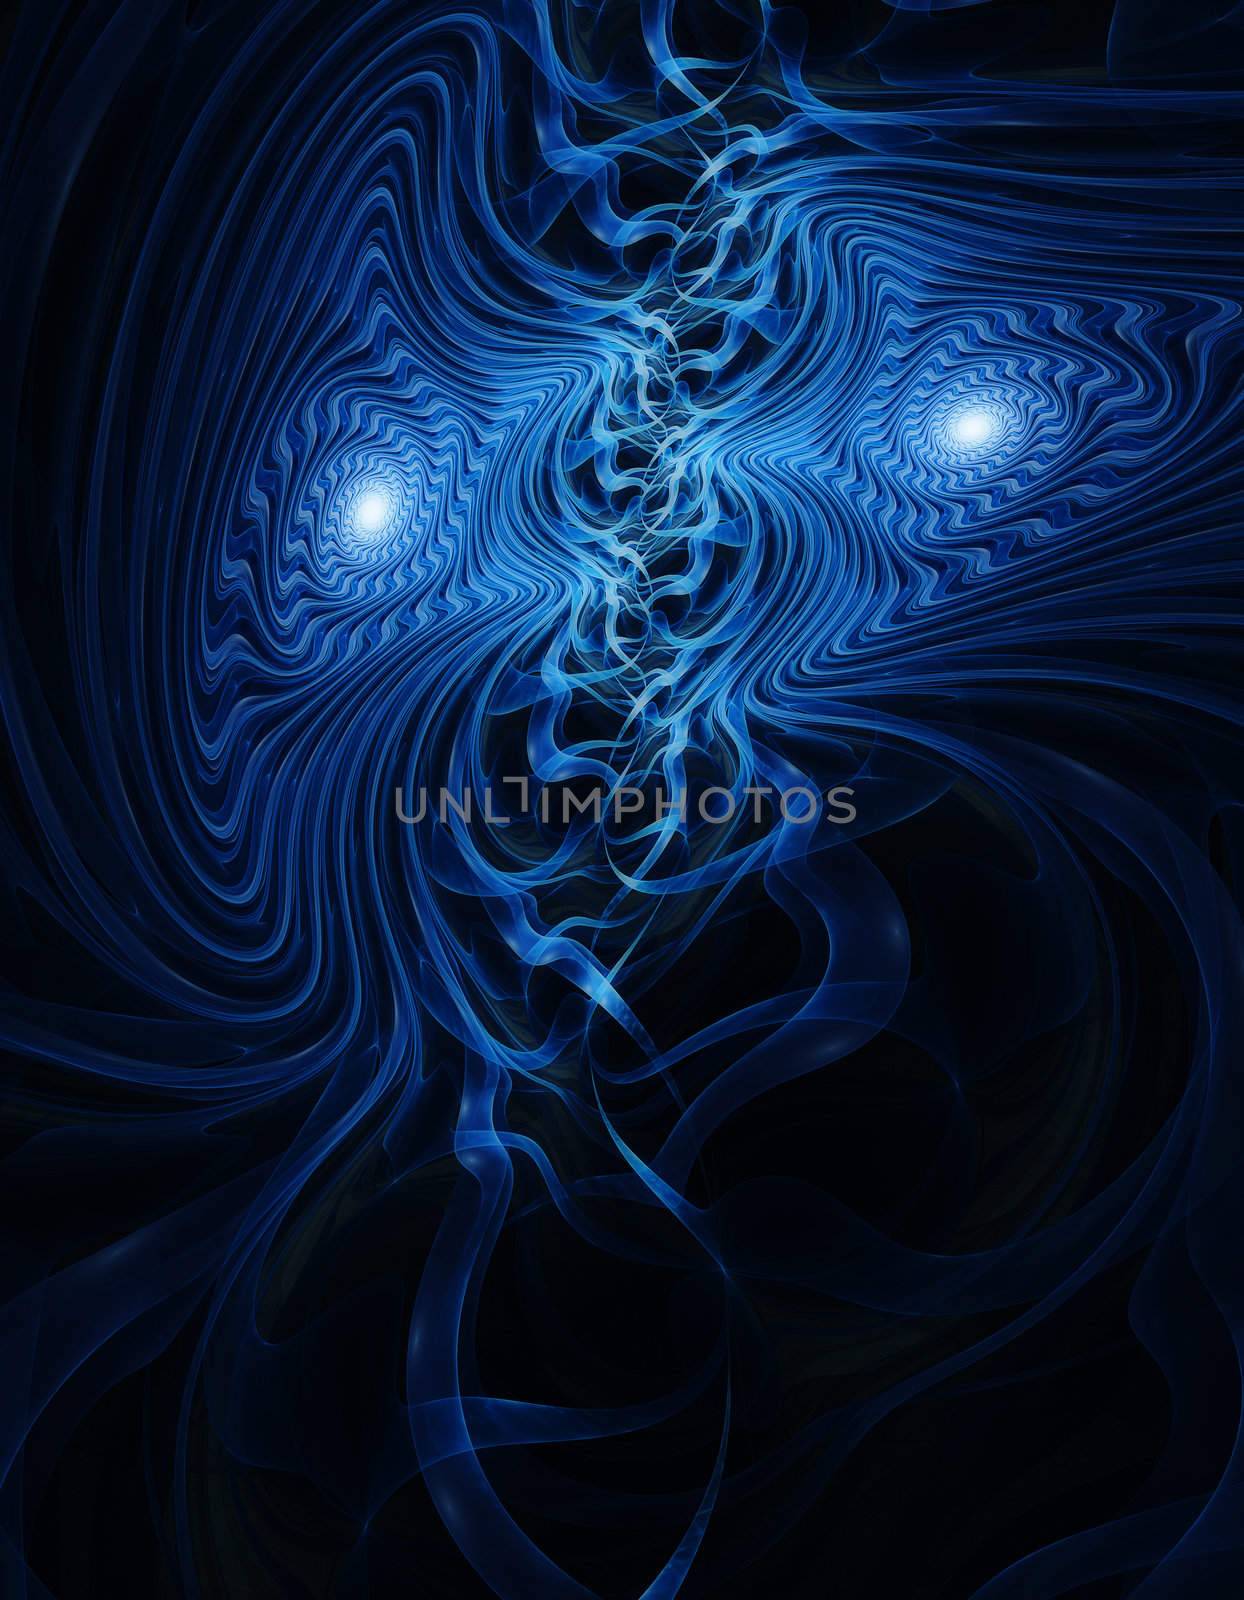 A fractal resembling blue eyes and wavy lines on a black background rendered in Apophysis 